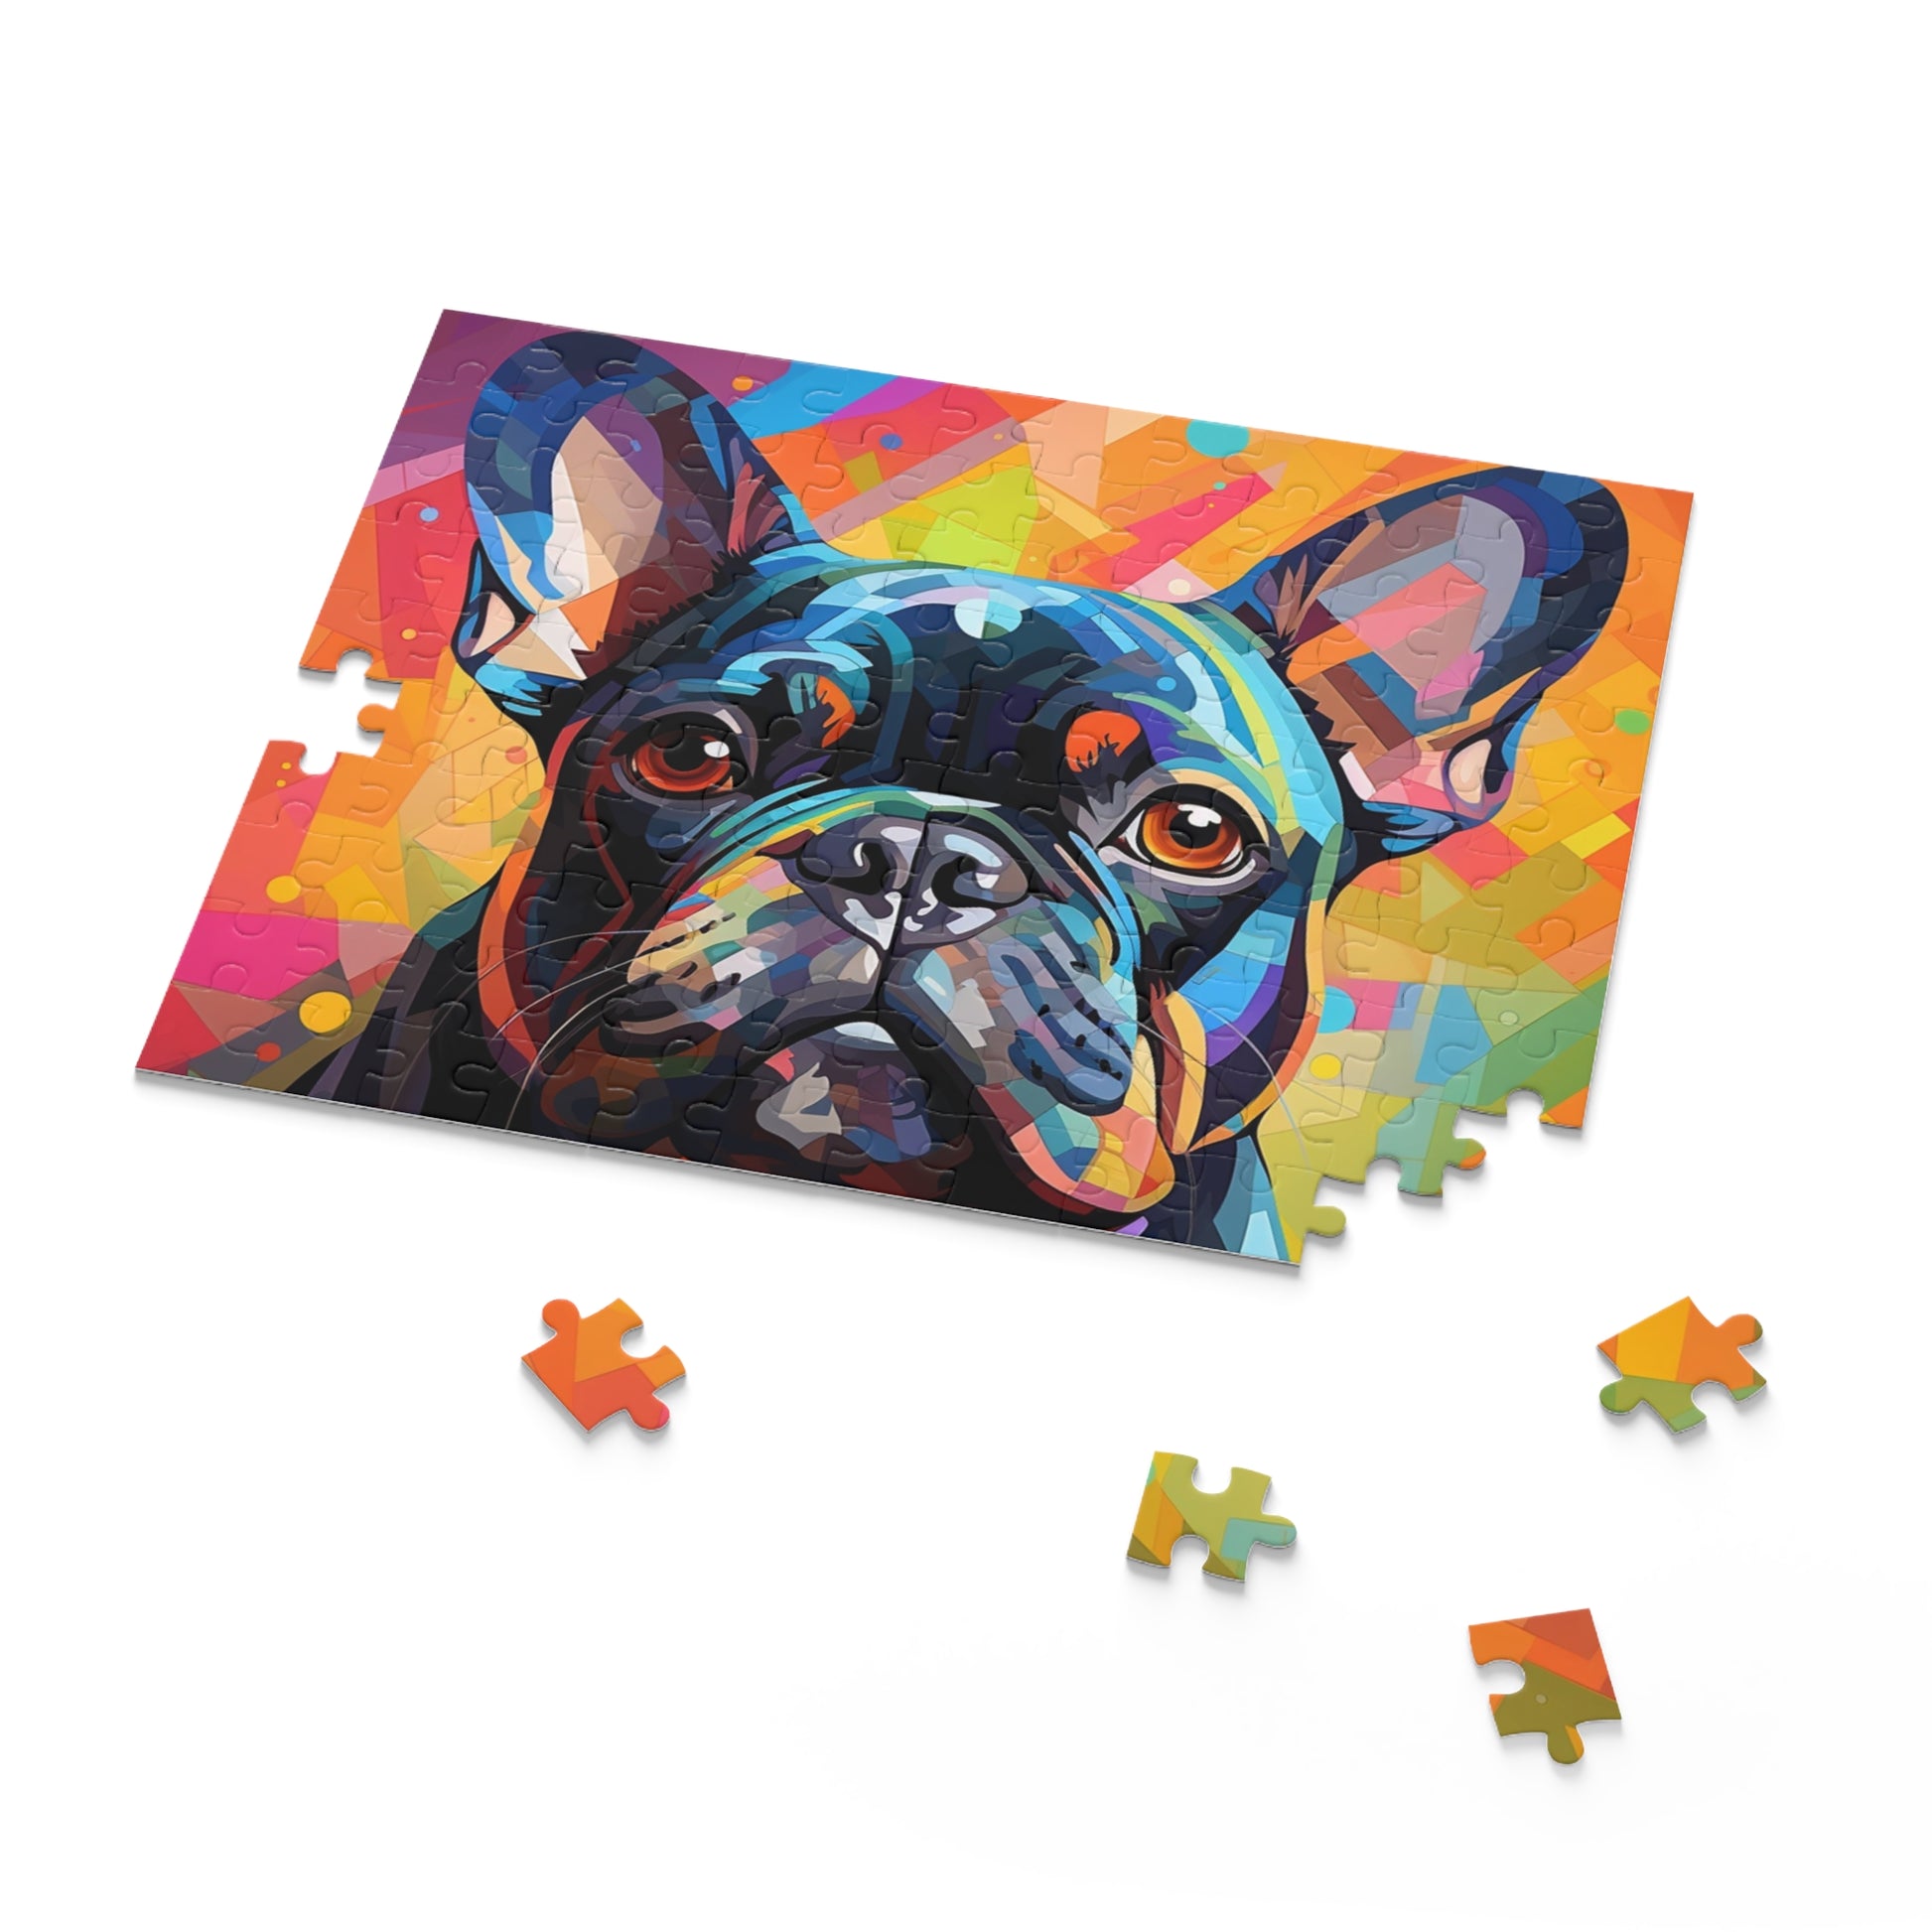 Abstract Frenchie Oil Paint Dog Jigsaw Puzzle Adult Birthday Business Jigsaw Puzzle Gift for Him Funny Humorous Indoor Outdoor Game Gift For Her Online-7